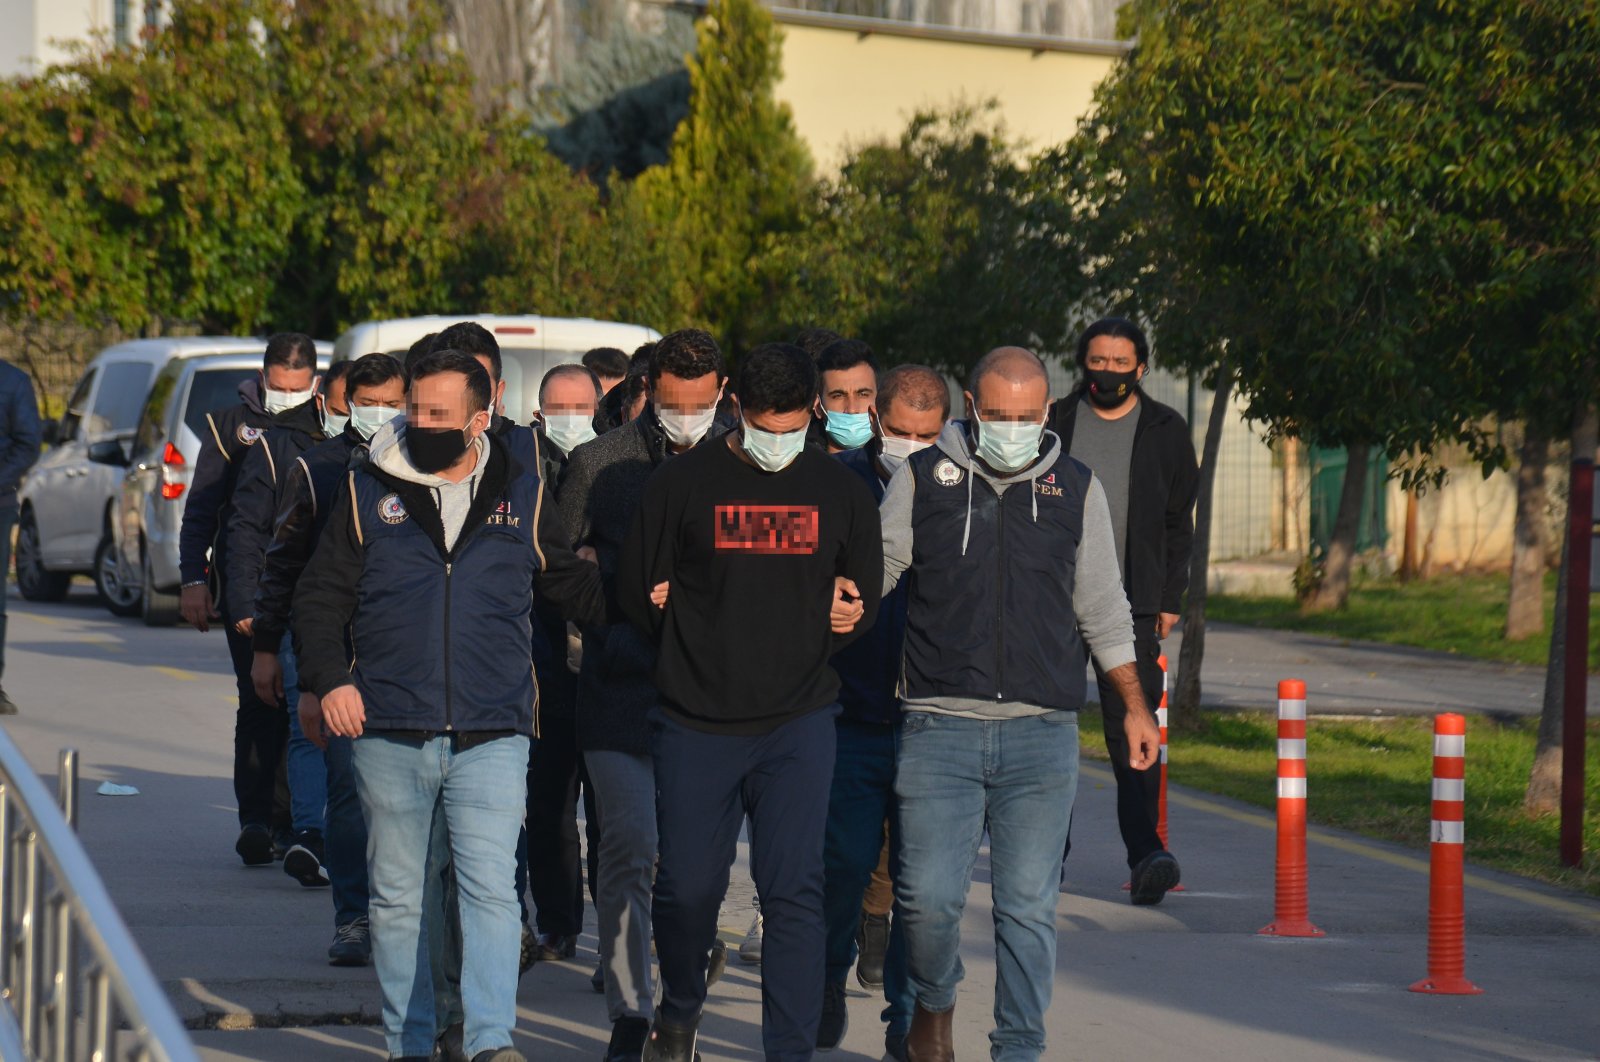 Police officers escort captured FETÖ suspects, in Adana, southern Turkey, March 29, 2022. (DHA PHOTO)